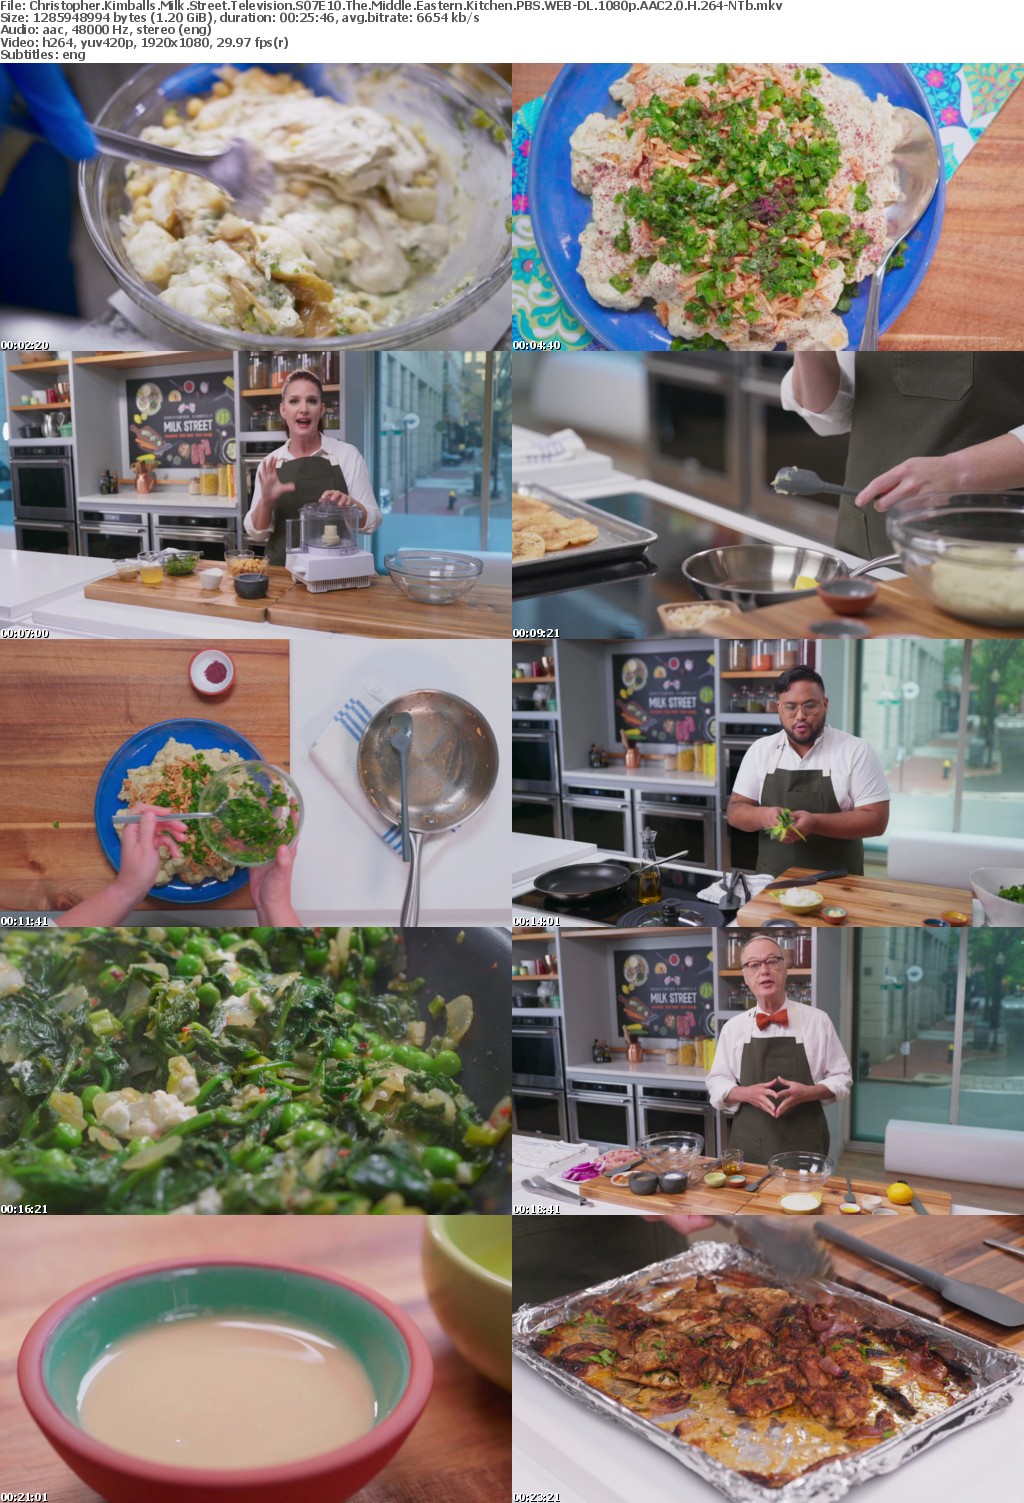 Christopher Kimballs Milk Street Television S07E10 The Middle Eastern Kitchen PBS WEB-DL 1080p AAC2 0 H 264-NTb